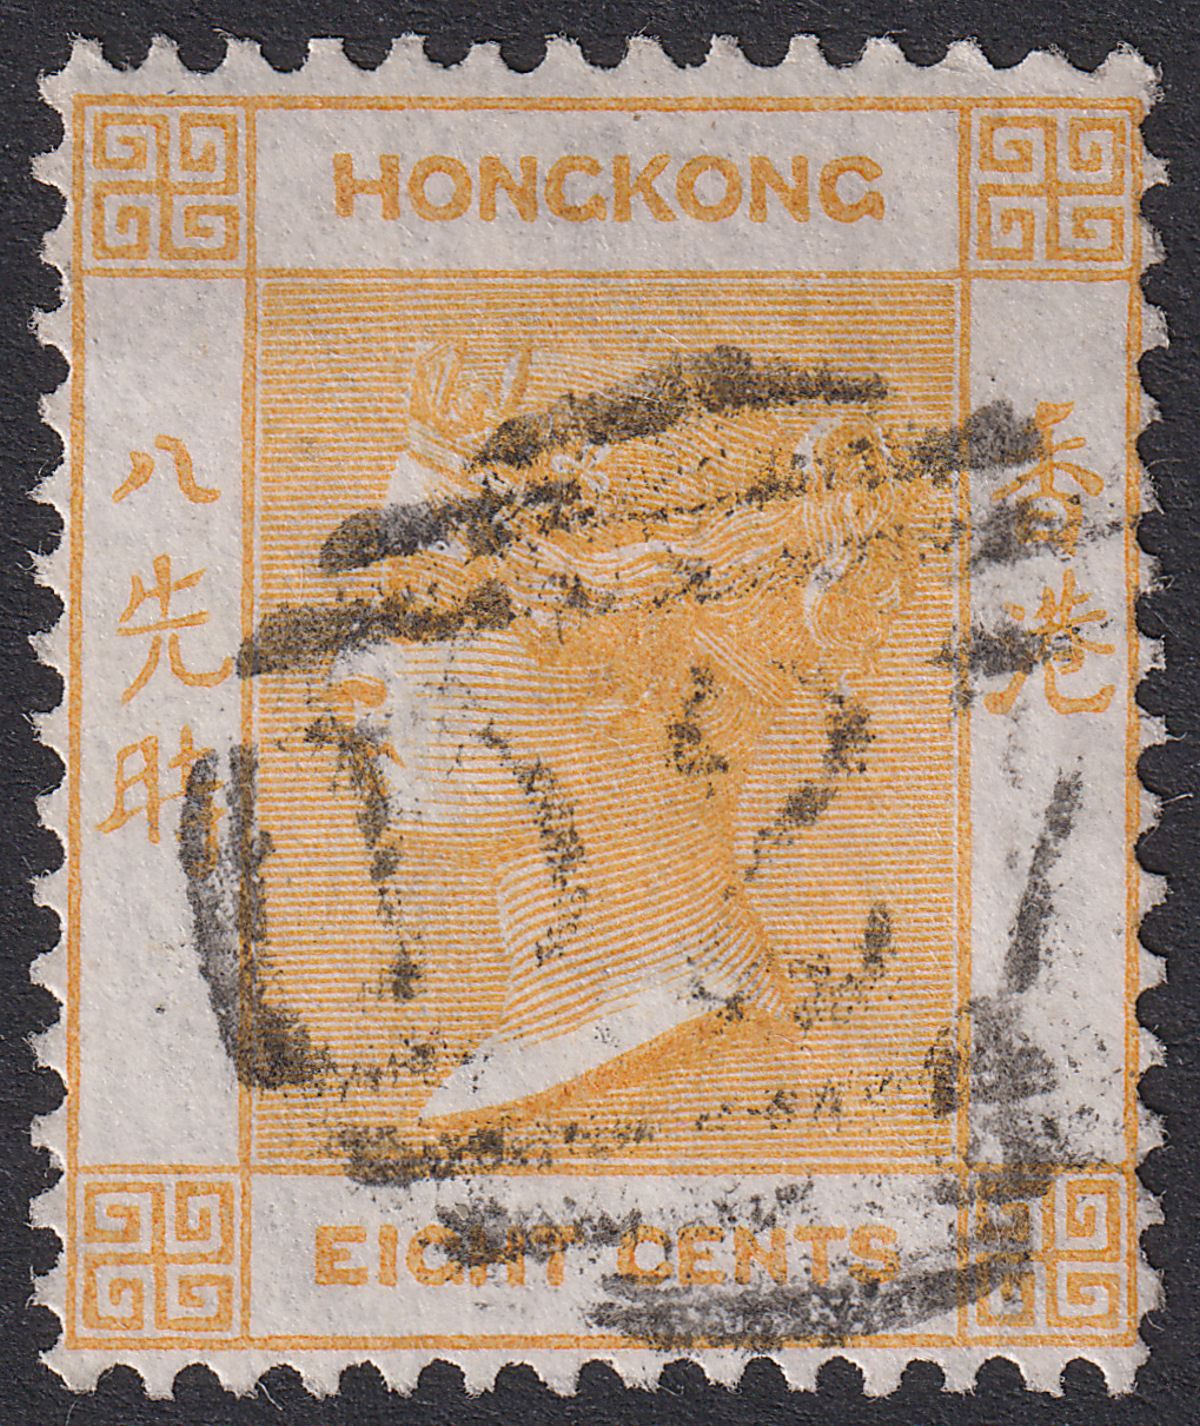 Hong Kong 1863 QV 8c Orange Used with D27 Postmark Amoy SG Z11 cat £55